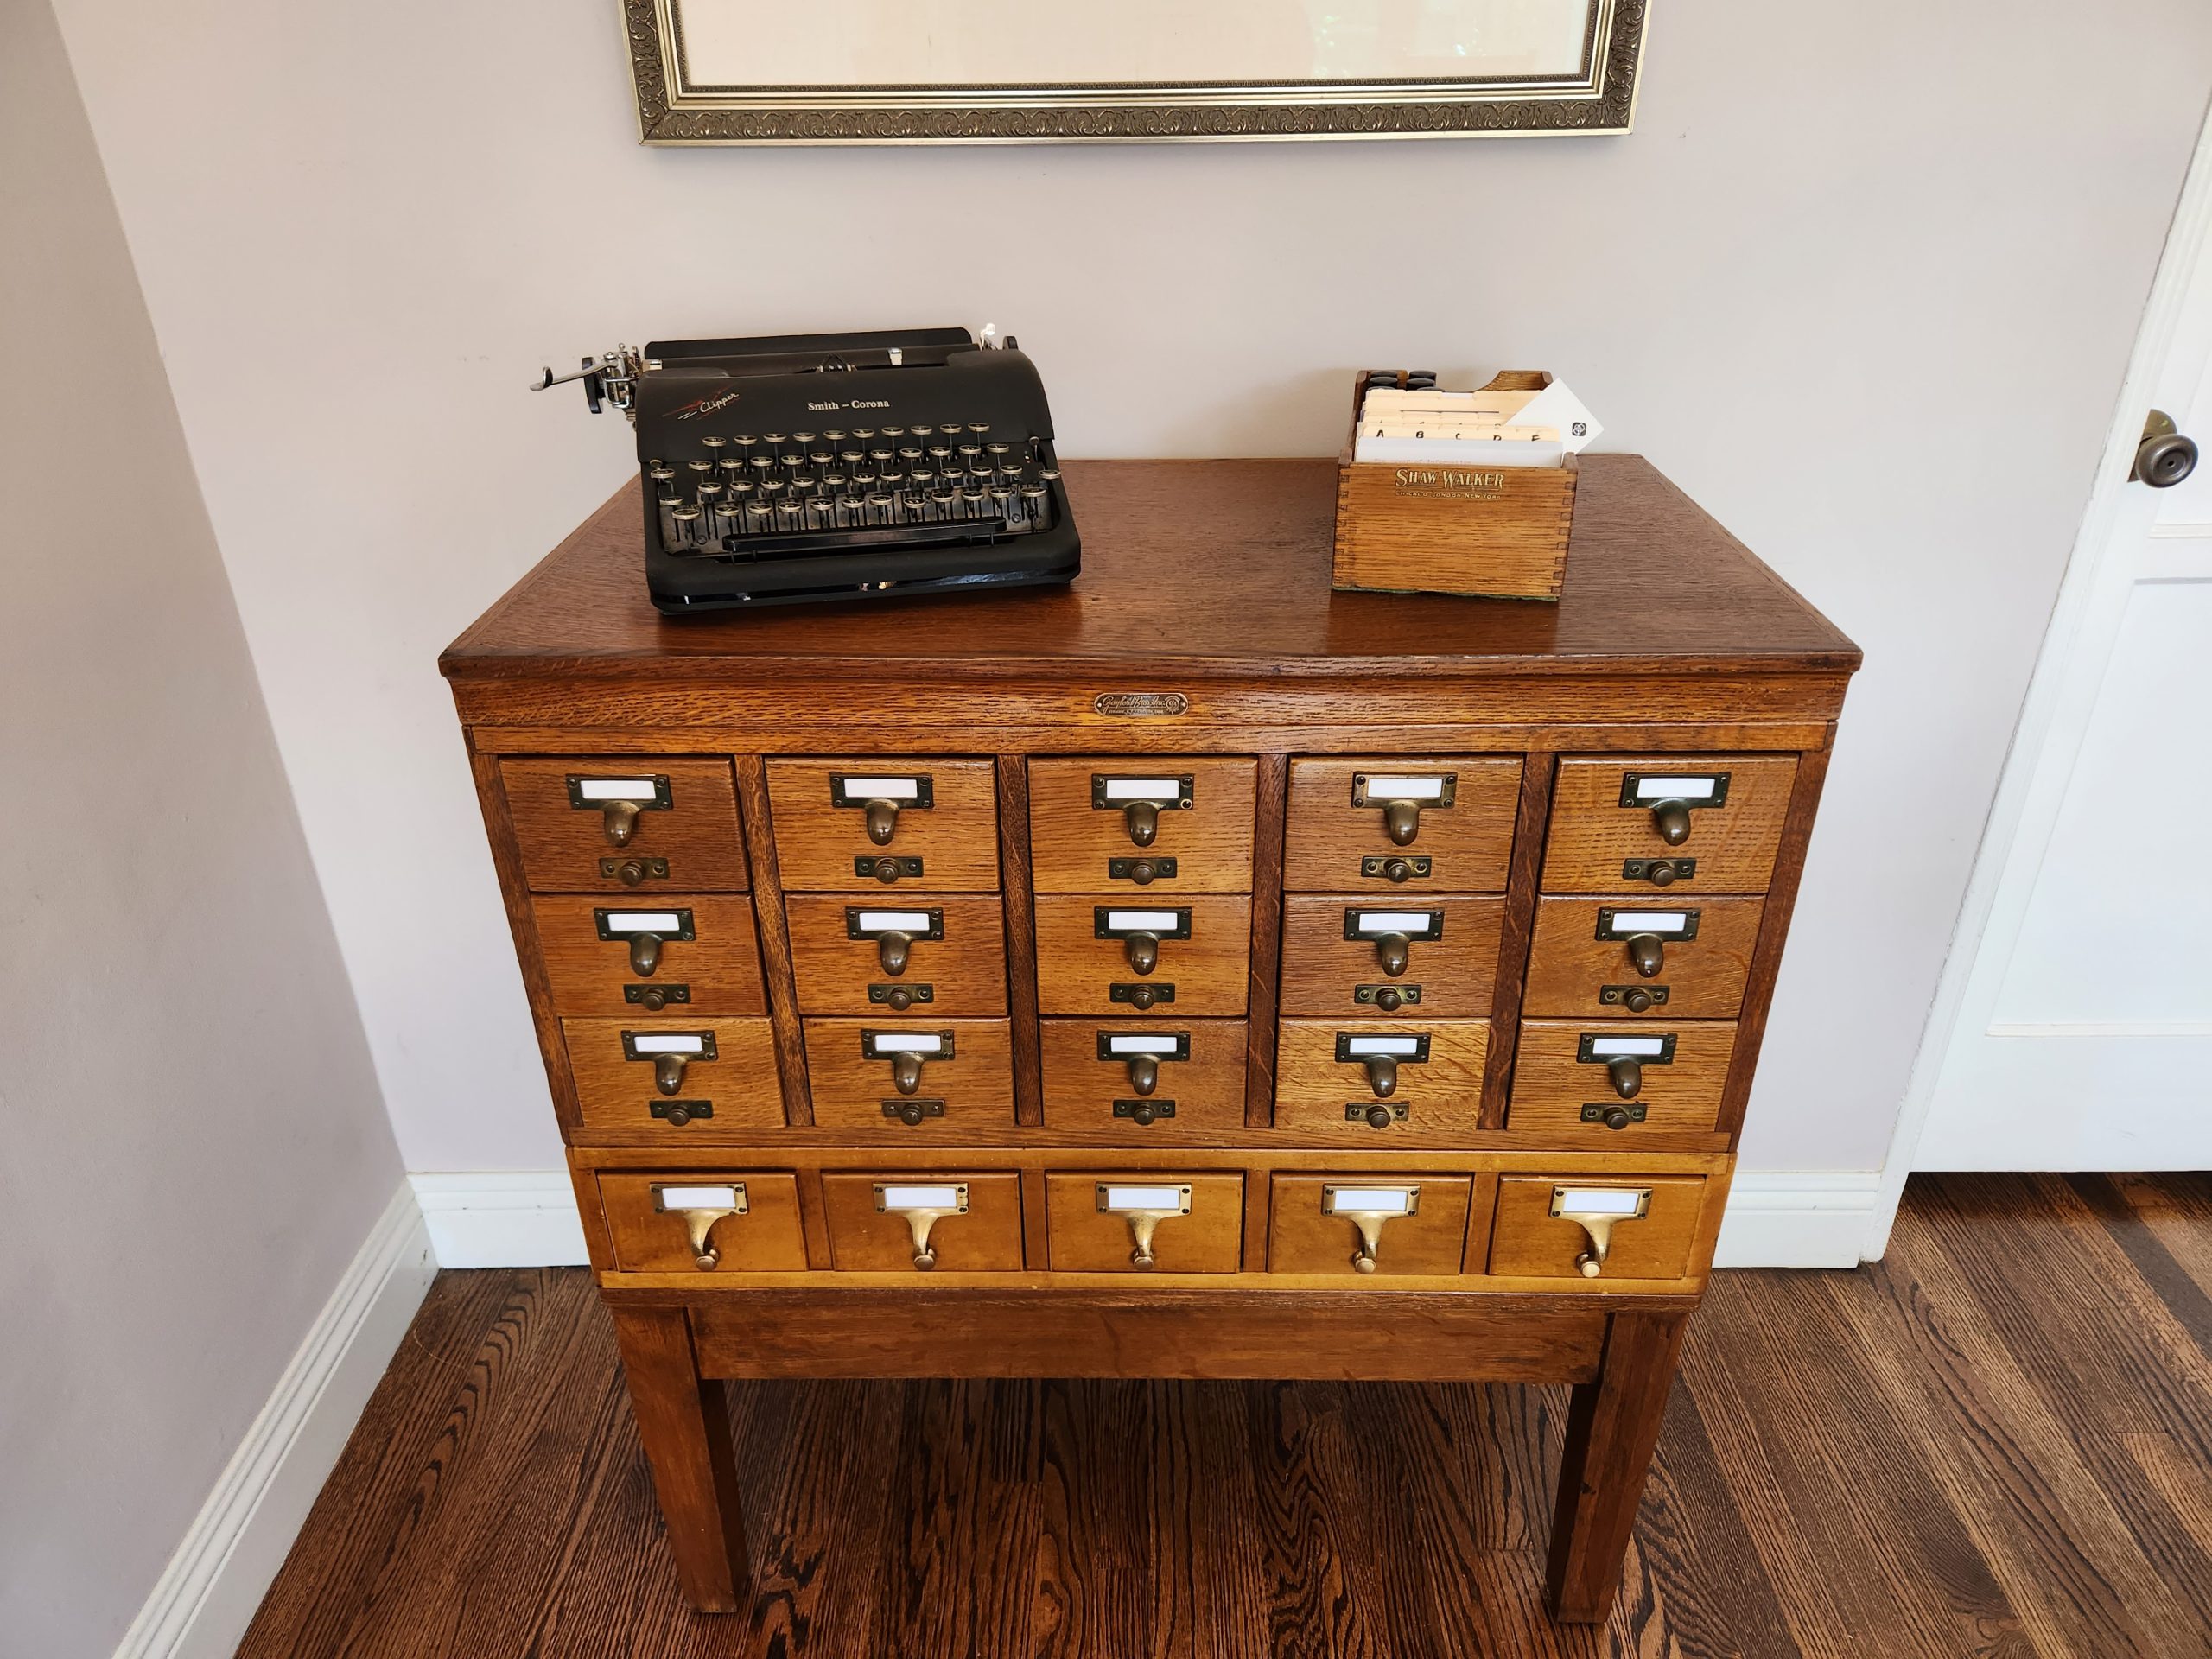 A waist high Gaylord Bros. library card catalog with a smaller desktop card index and black Smith-Corona Clipper typewriter on top.